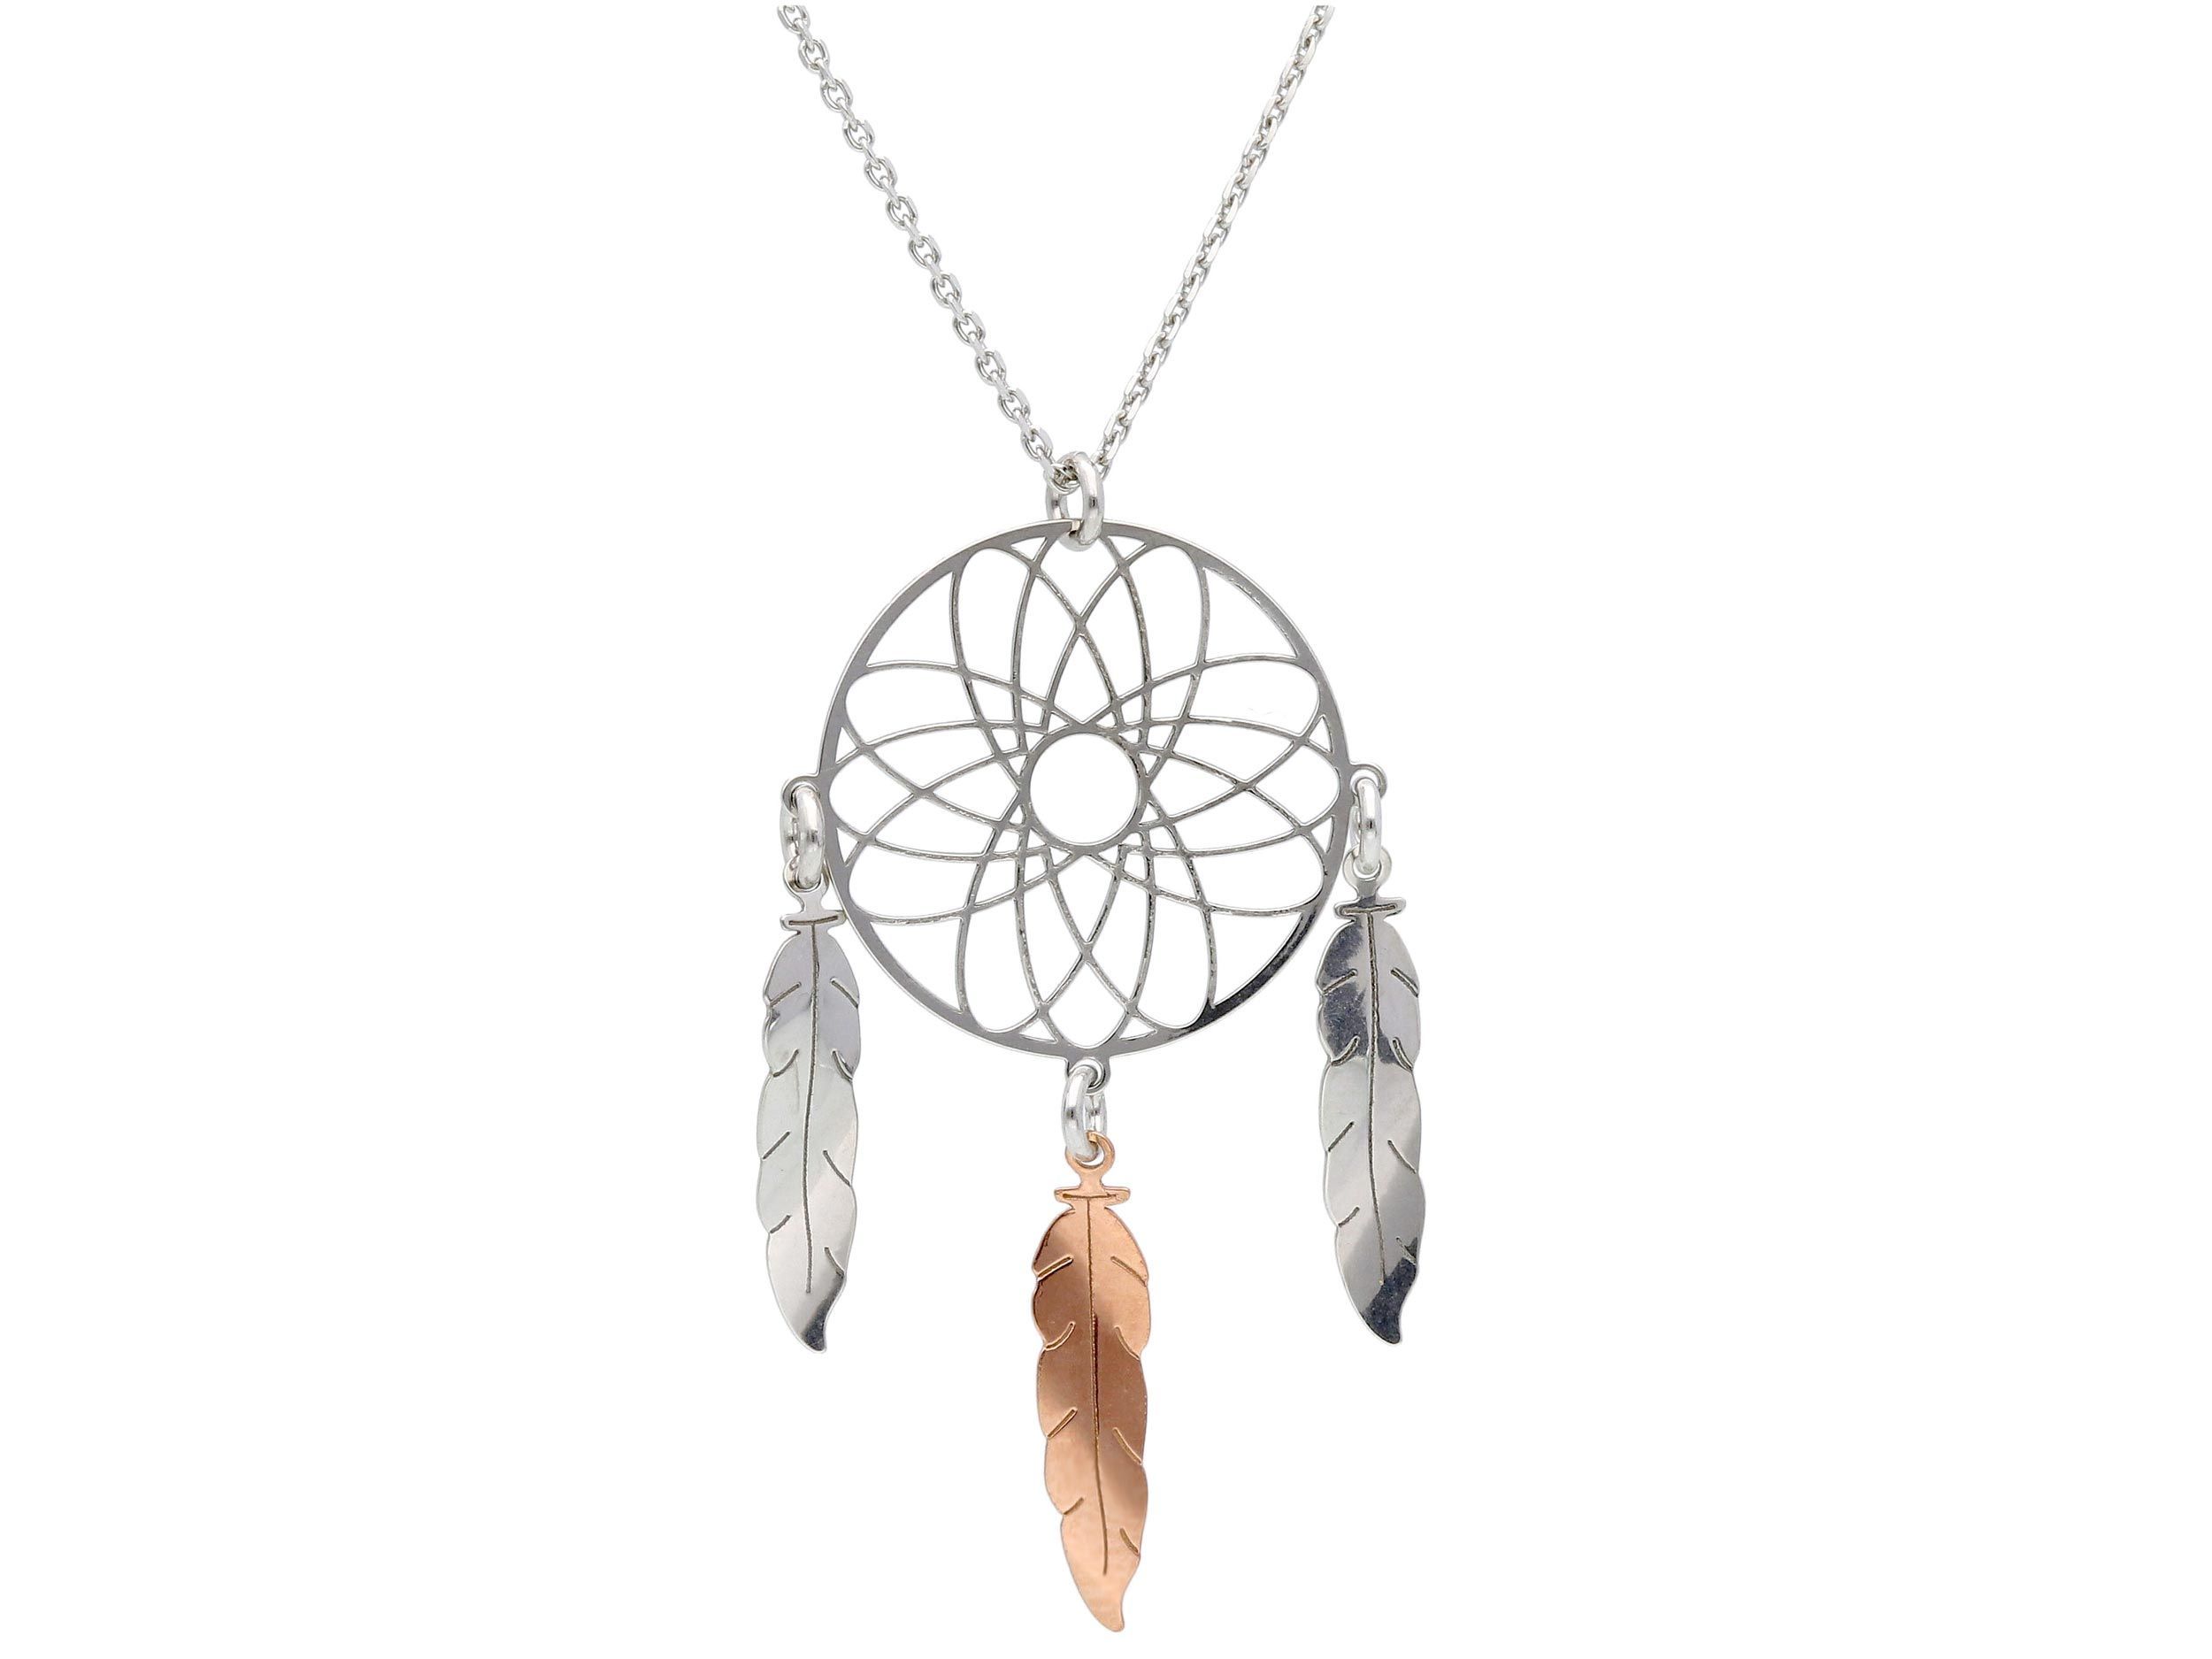   Platinum plated silver 925° dream catcher necklace (code S221532)